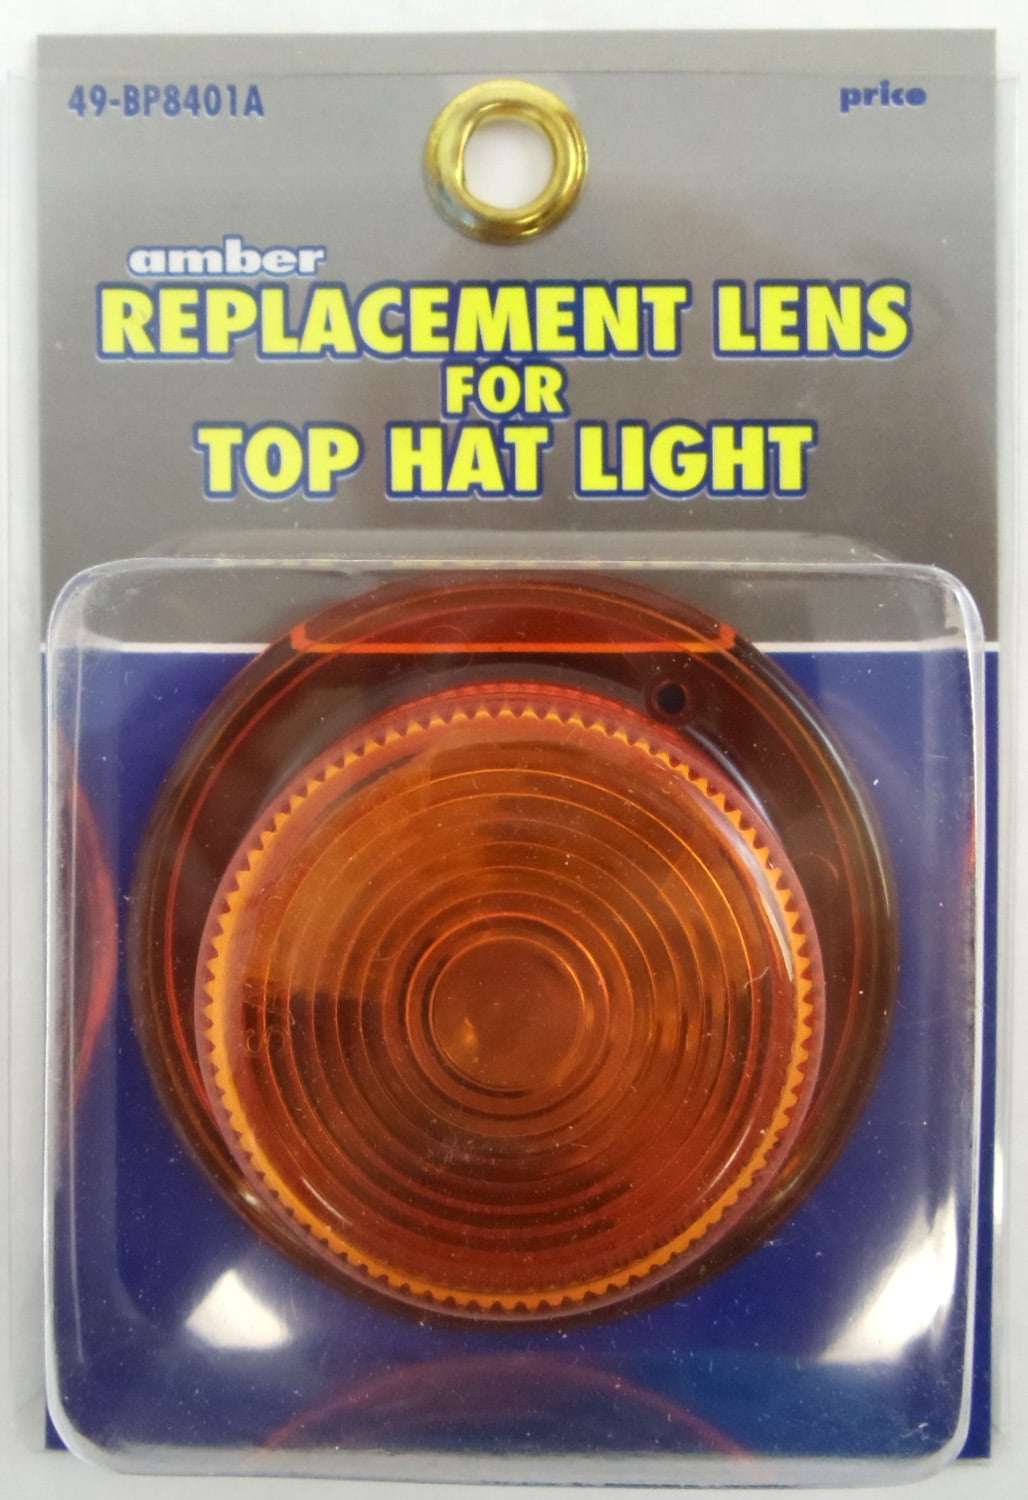 049bp8401a Replacement Lens For Top Hat Light, Amber